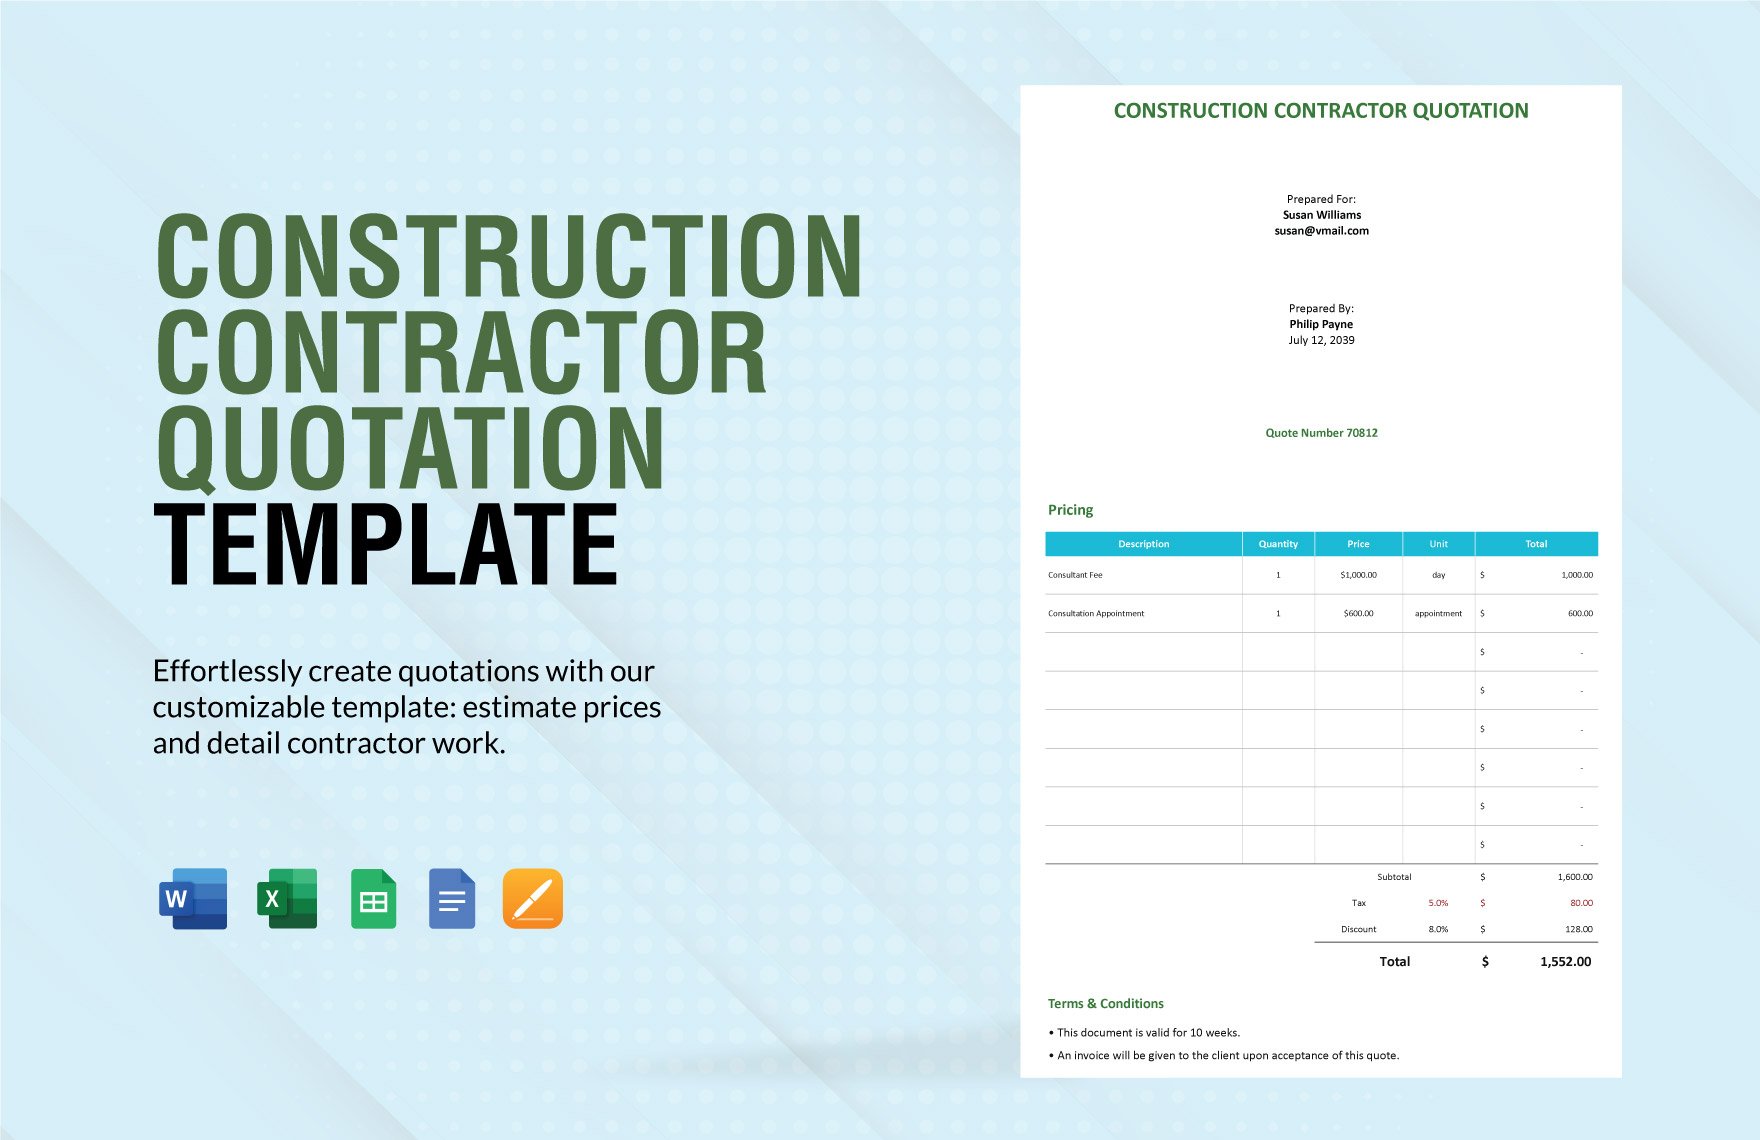 Construction Contractor Quotation Template in Word, Google Docs, Excel, Google Sheets, Apple Pages